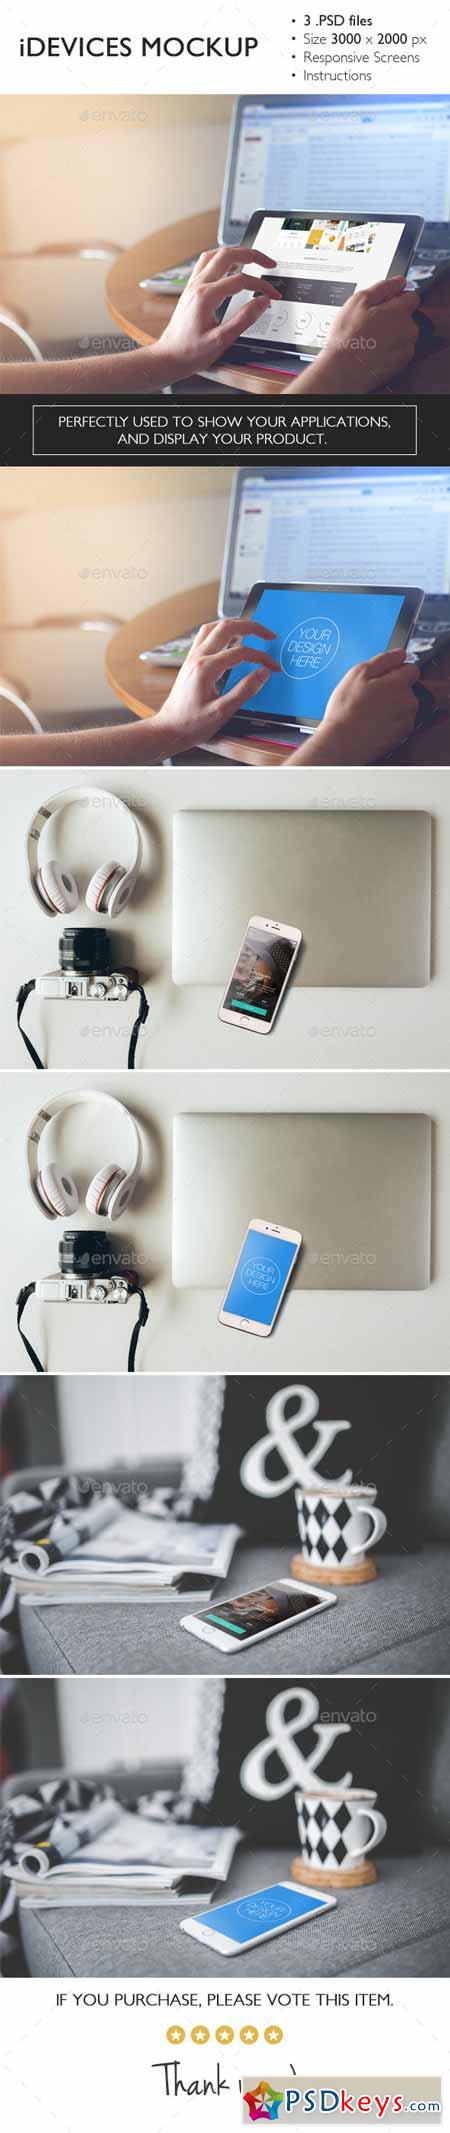 iDevices Mockup 11950762